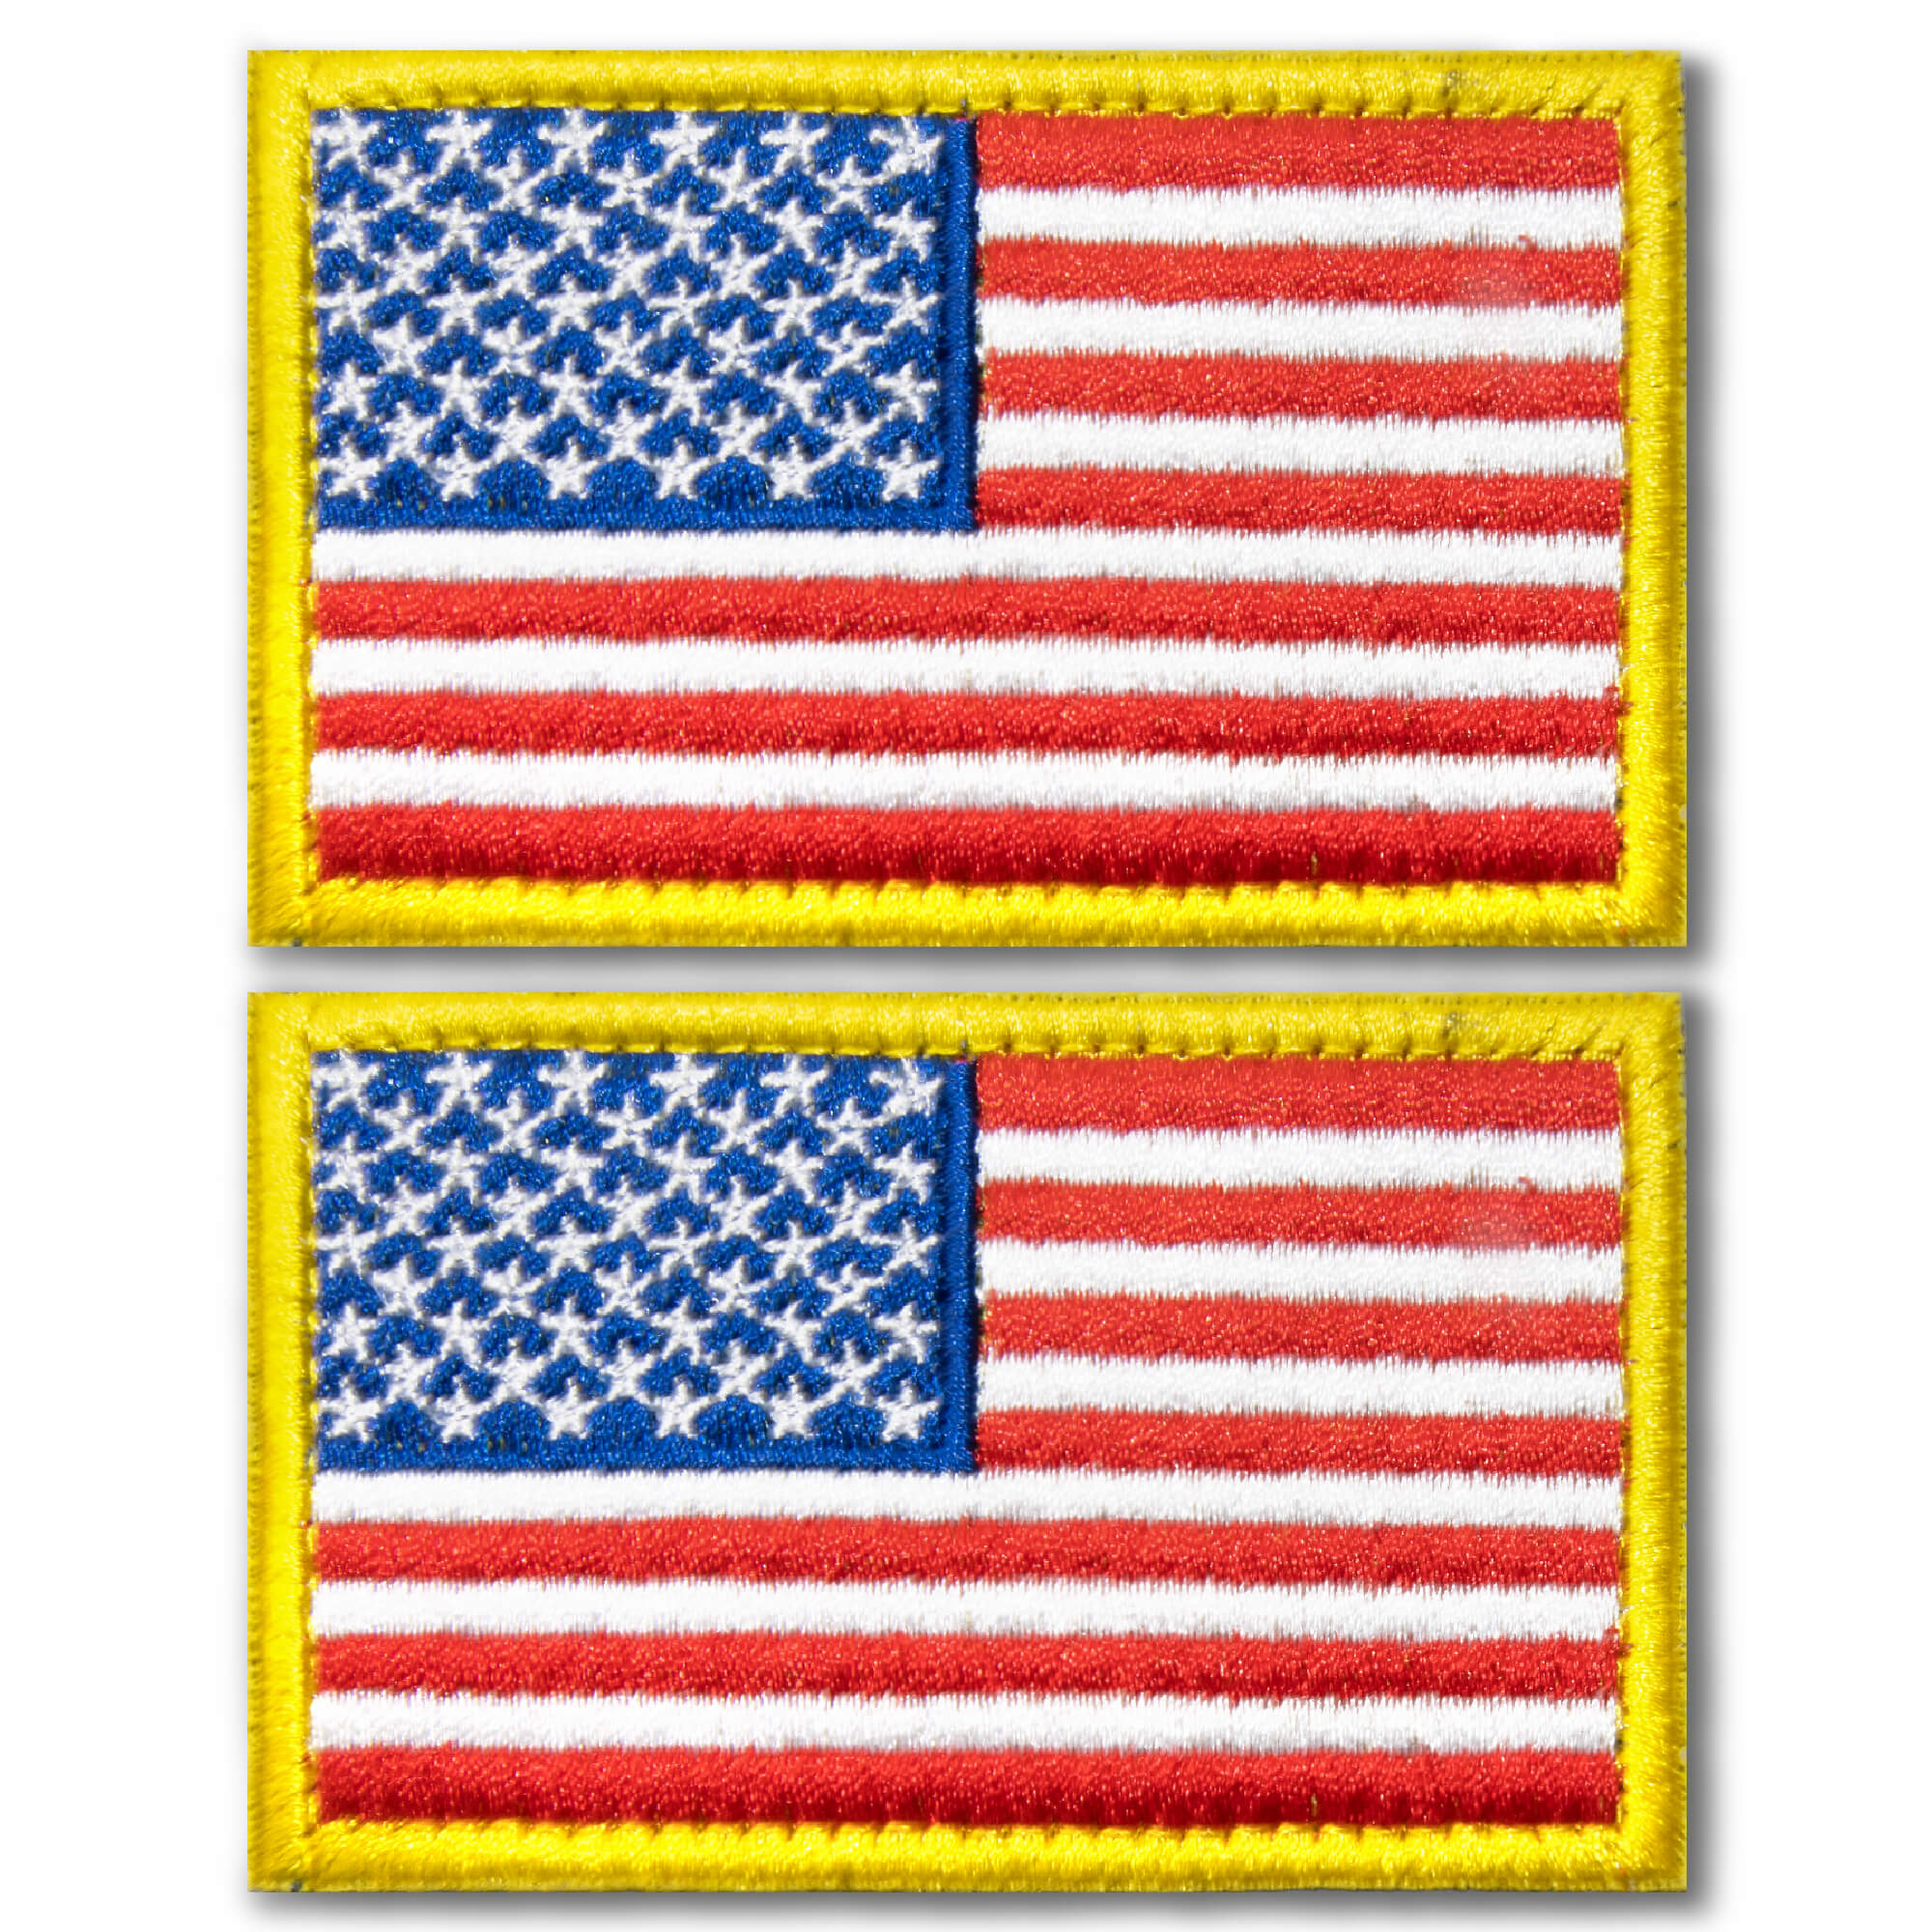 Tactical USA Flag Embroidered Patches (2 Pack) - 2x 3 - Anley Flags